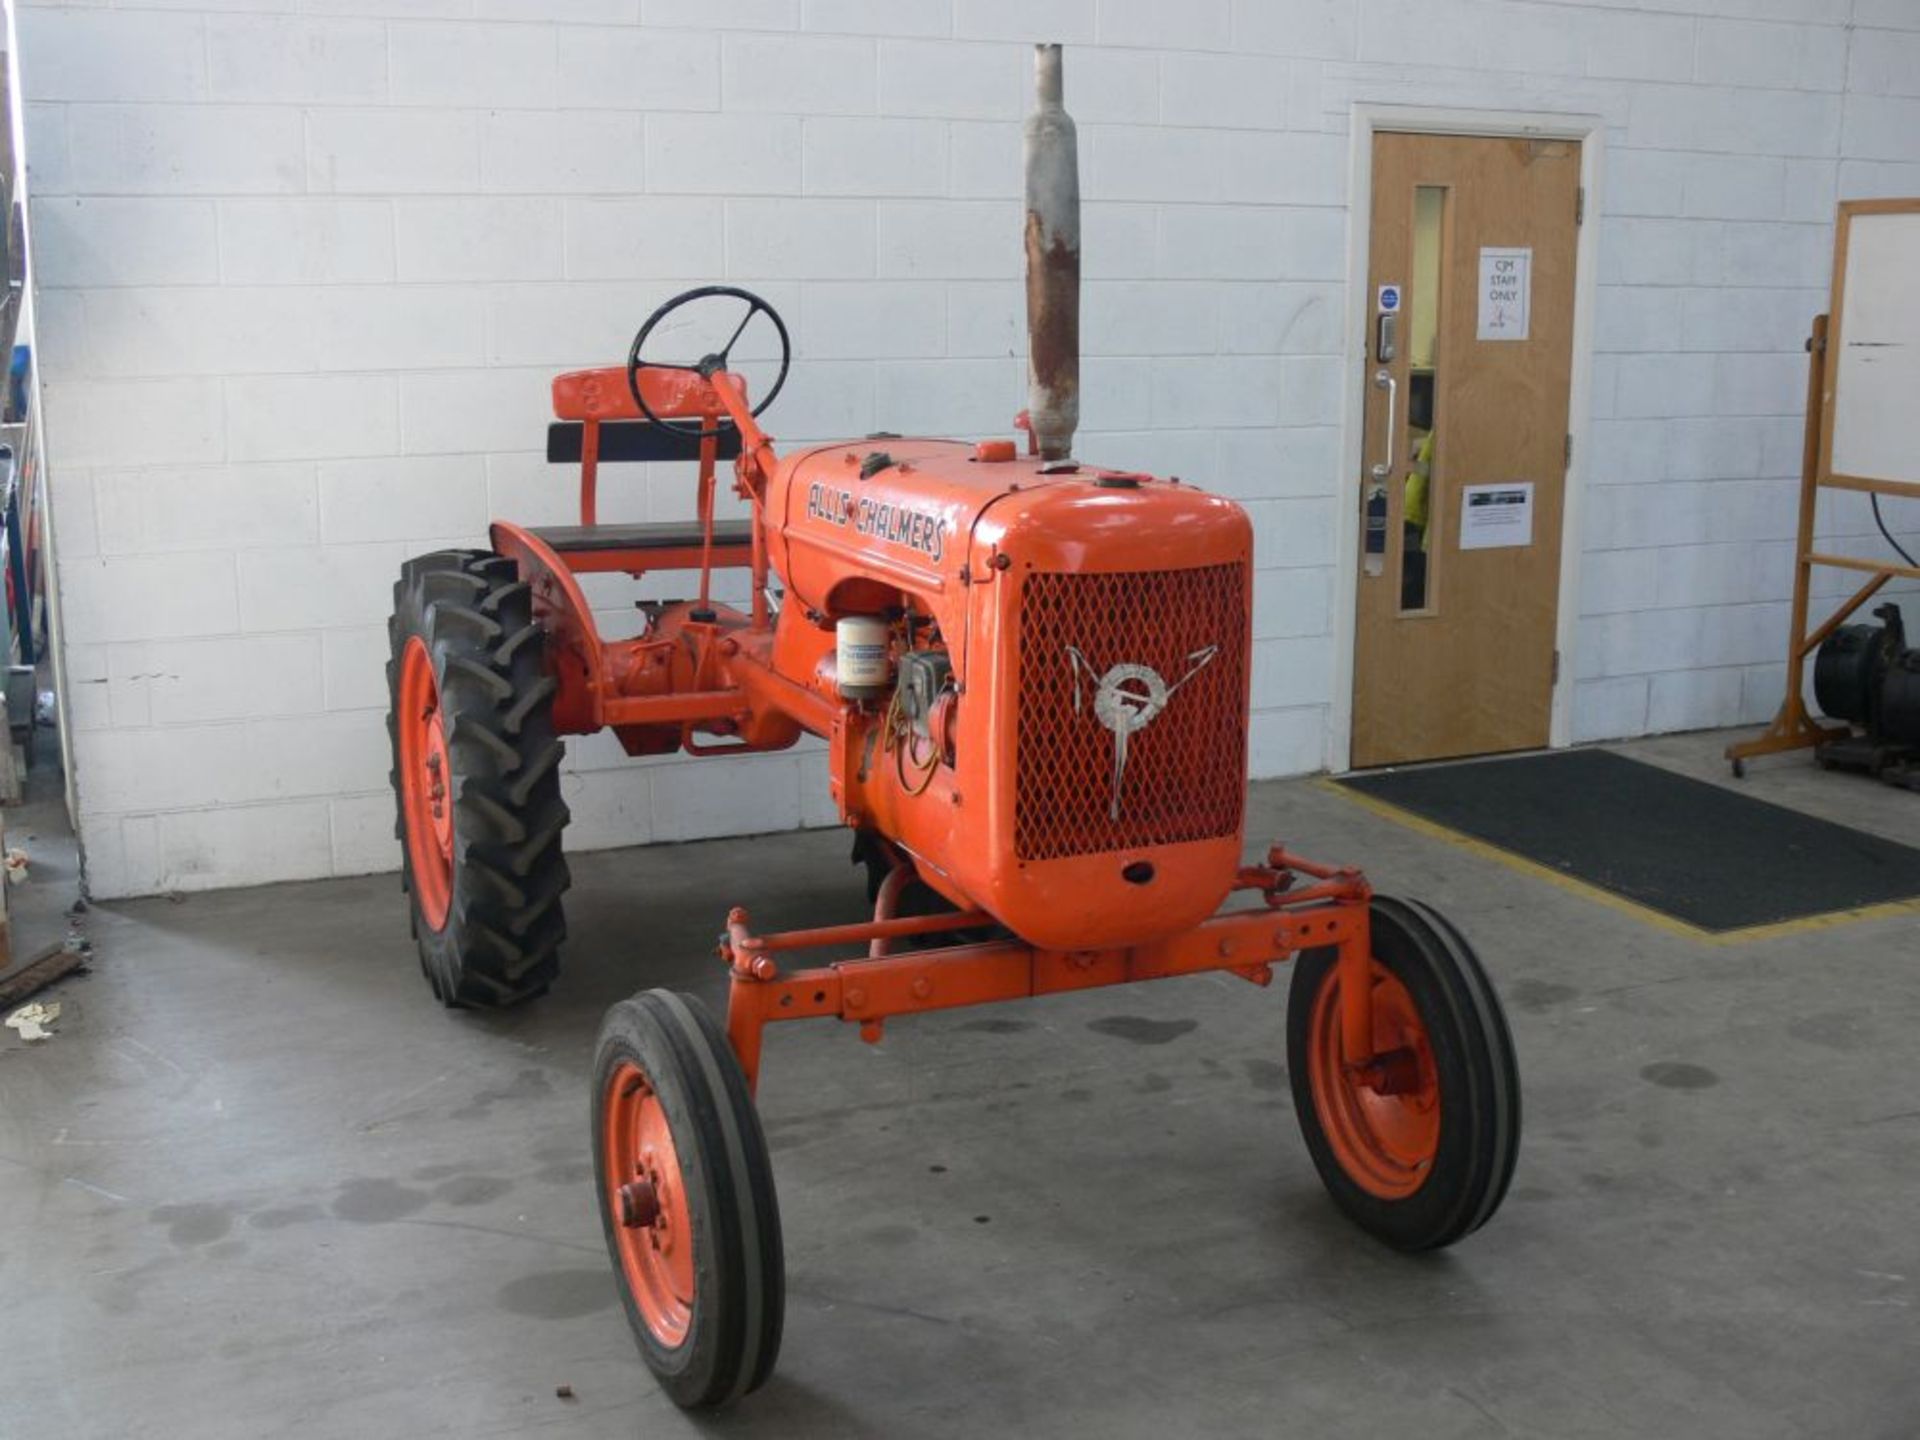 A 1949 Allis-Chalmers Model B Tractor. Original registration date 15/01/1948. Date of first